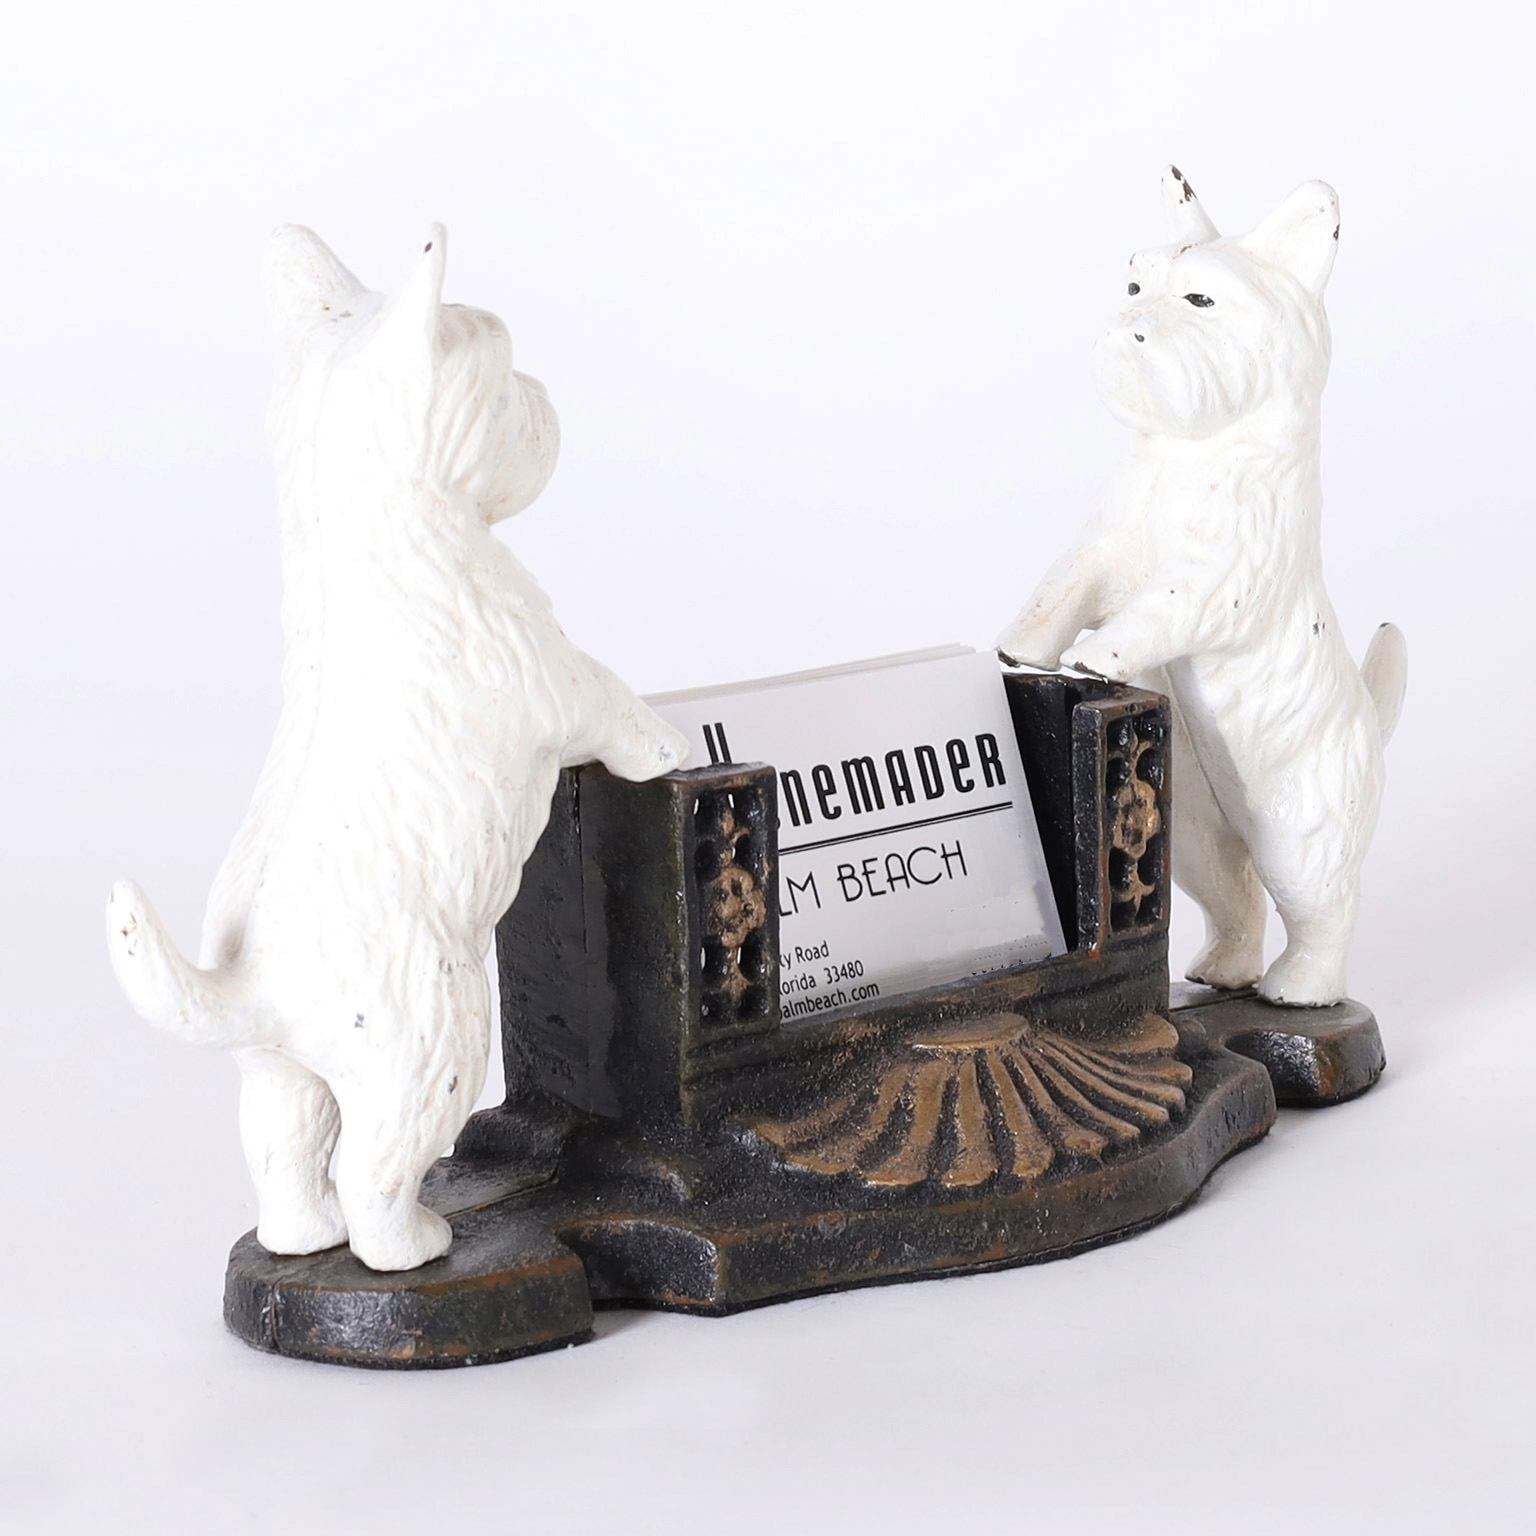 Pair of Business Card Holders with Dogs